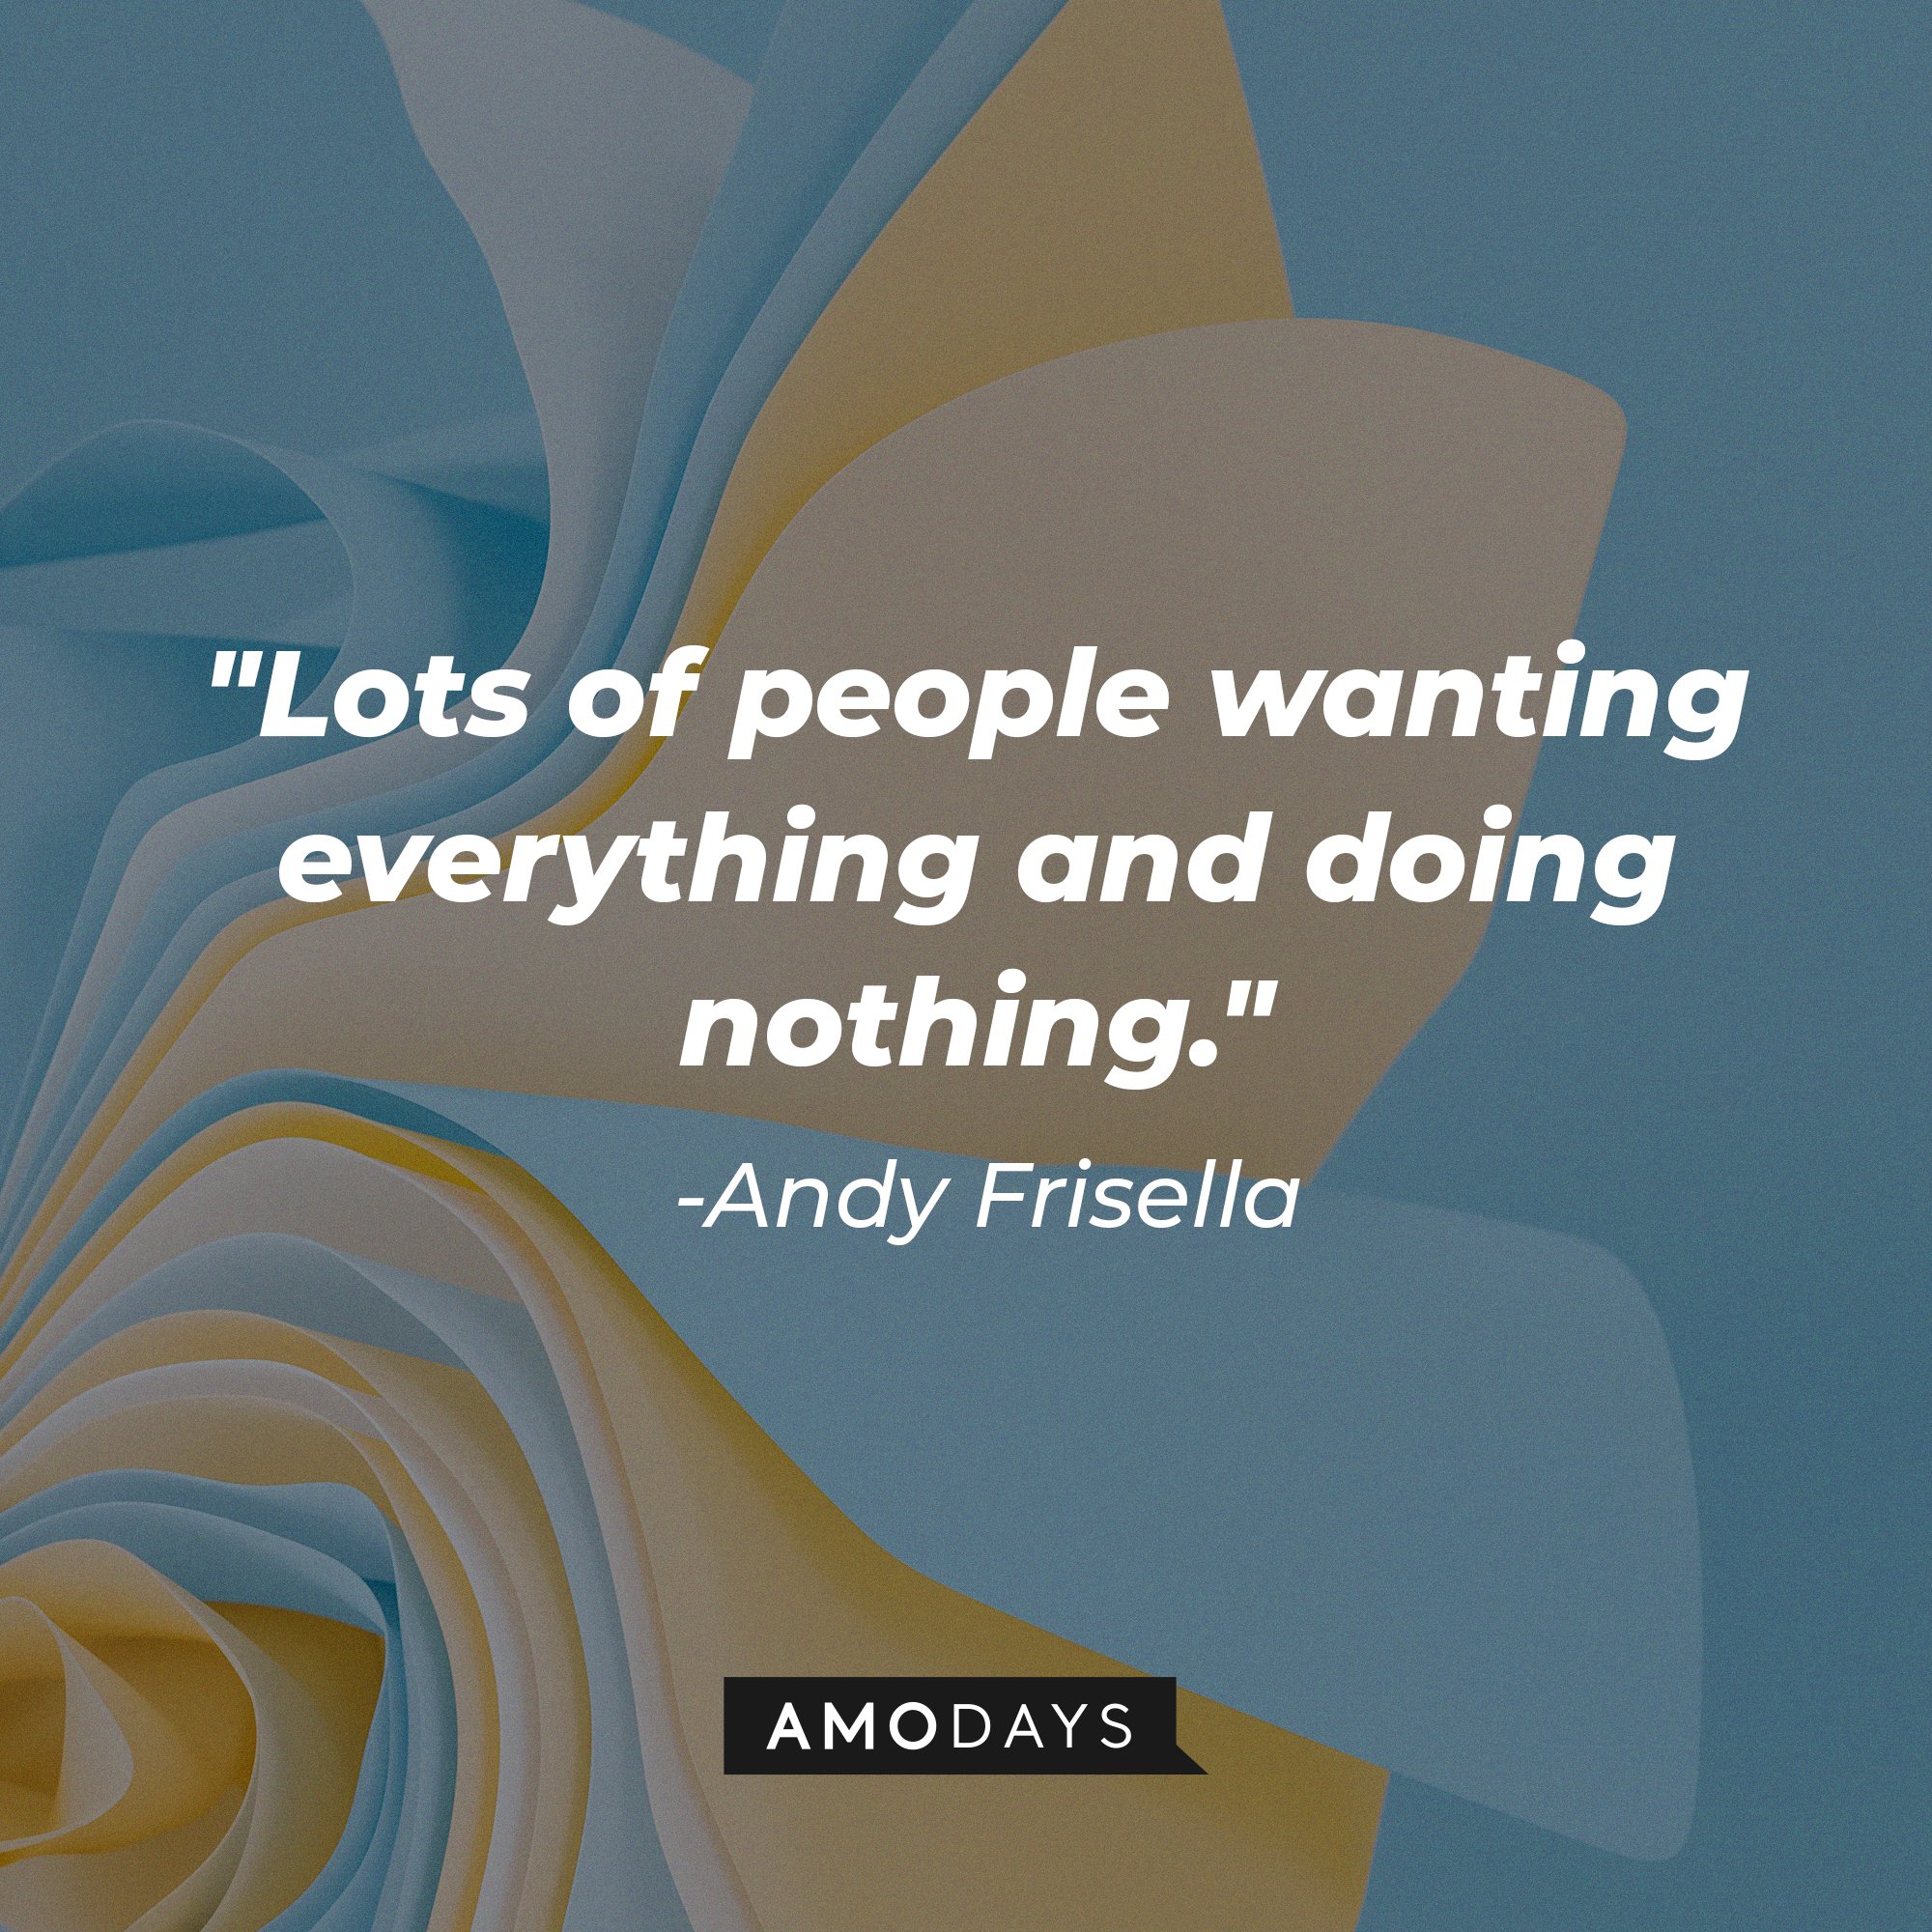 Andy Frisella's quote: "Lots of people wanting everything and doing nothing." | Image: AmoDays